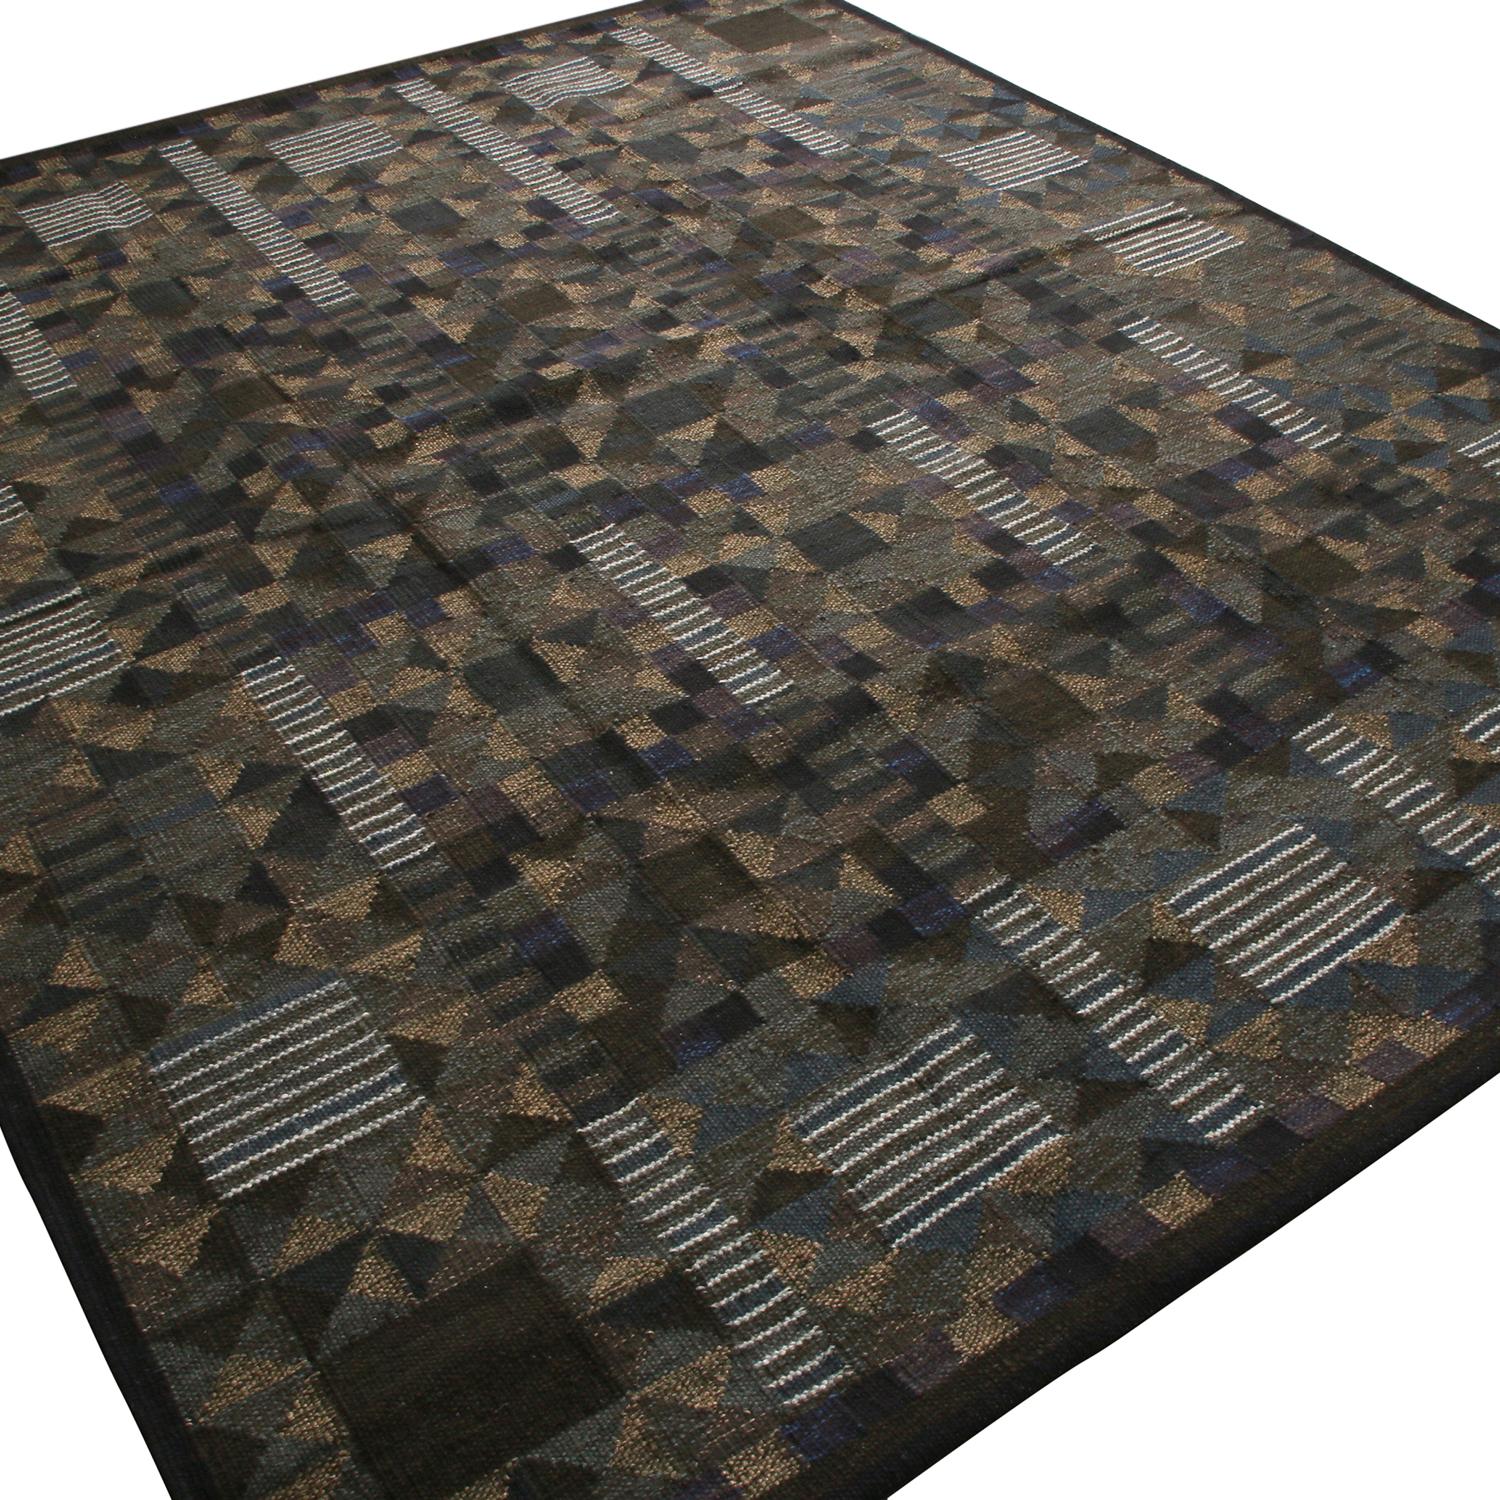 Originating from India, this hand knotted pile rug hails from Rug & Kilim’s Scandinavian-inspired collection, bound in high-quality New Zealand wool featuring a unique combination of geometric designs in multi-tonal brown, green, blue, and gray